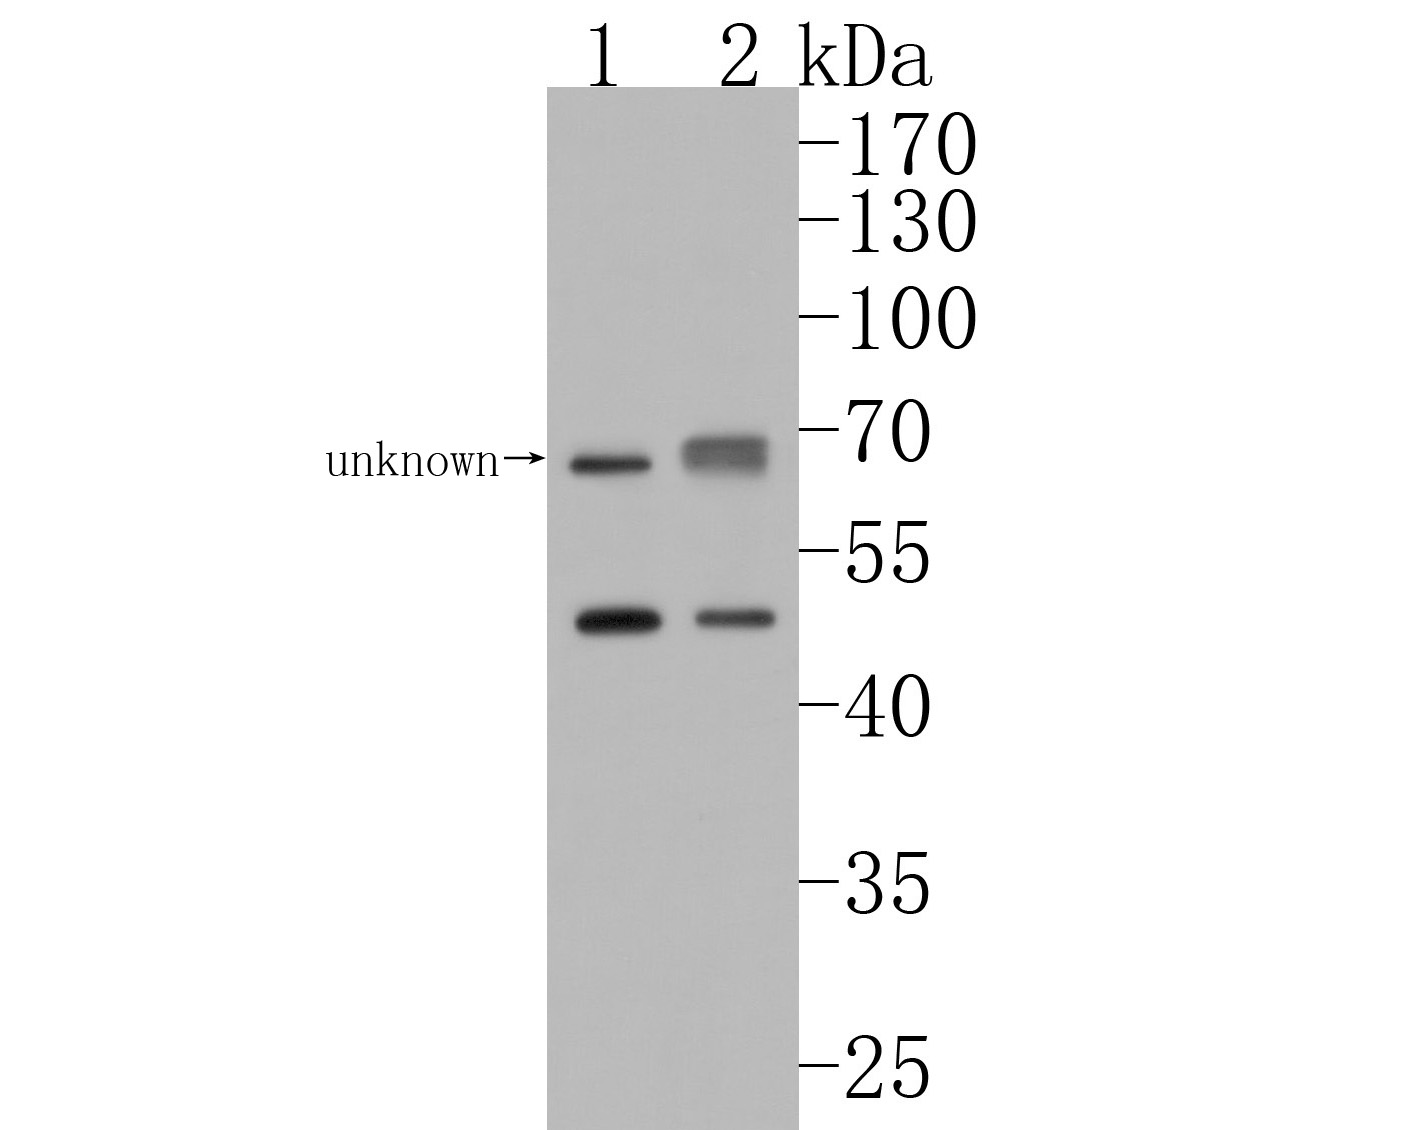 Western blot analysis of BTNL3 on different lysates. Proteins were transferred to a PVDF membrane and blocked with 5% BSA in PBS for 1 hour at room temperature. The primary antibody (HA500238, 1/500) was used in 5% BSA at room temperature for 2 hours. Goat Anti-Rabbit IgG - HRP Secondary Antibody (HA1001) at 1:200,000 dilution was used for 1 hour at room temperature.<br />
Positive control: <br />
Lane 1: HL-60 cell lysate<br />
Lane 2: Human small intestine tissue lysate